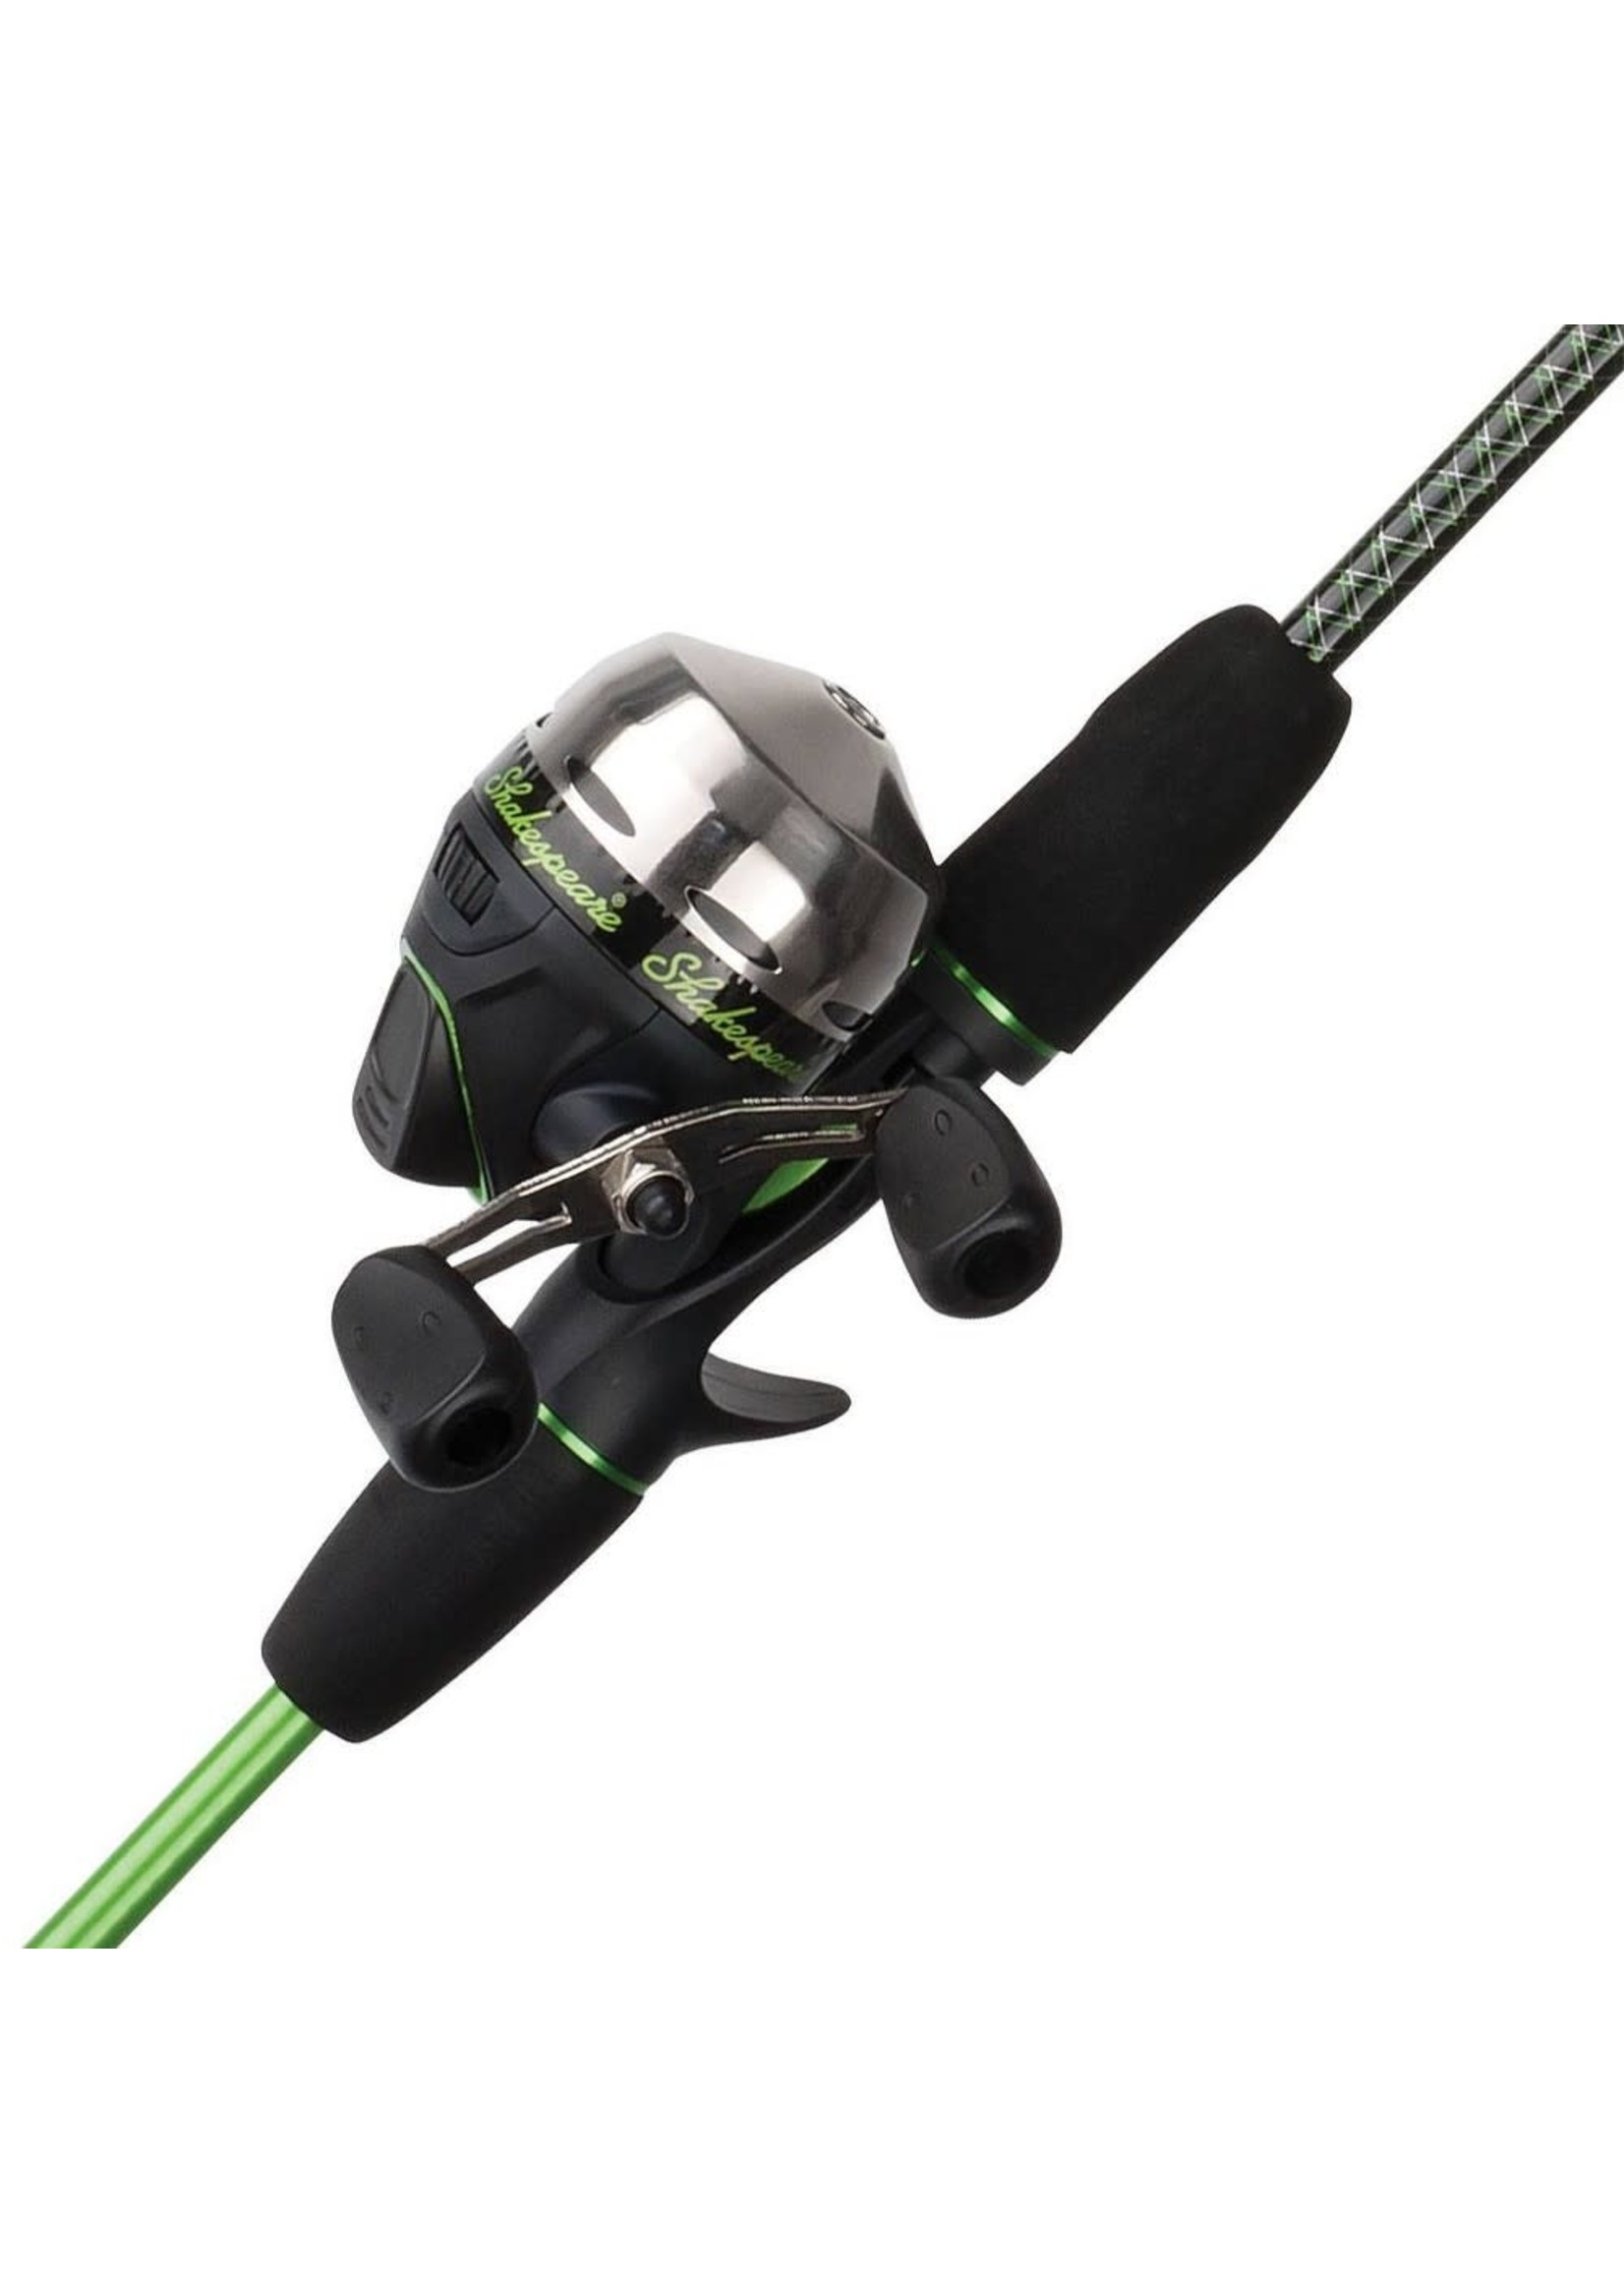 Shakespeare SHAKESPEARE UGLY STIK SPIN CAST COMBO  2M 5'6"